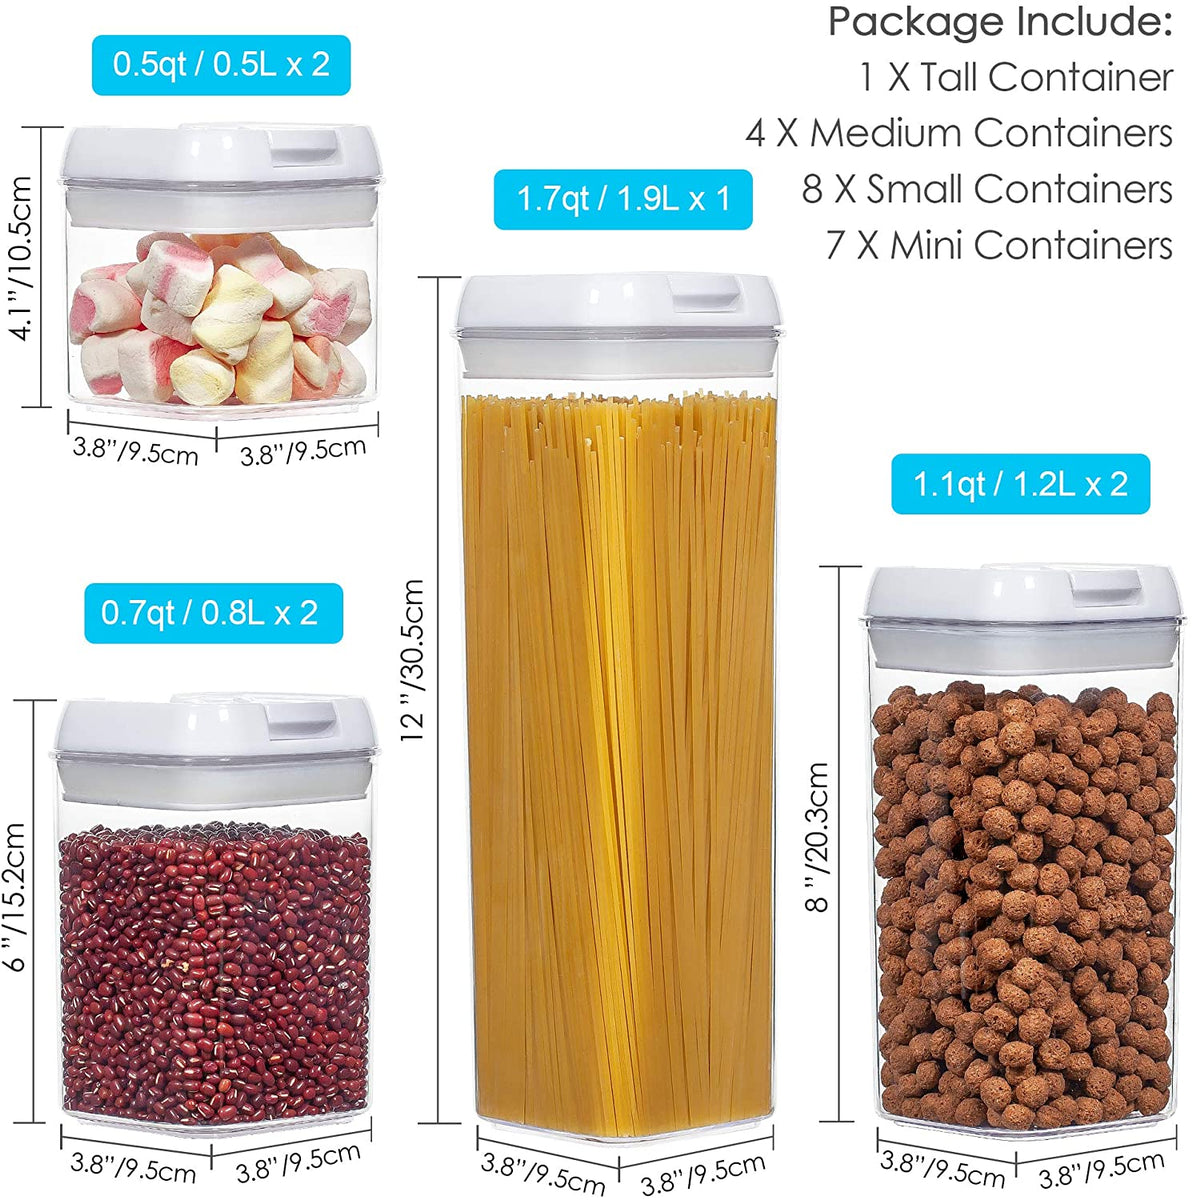 10/11pcs Airtight Food Storage Containers With Lids, Bpa-free